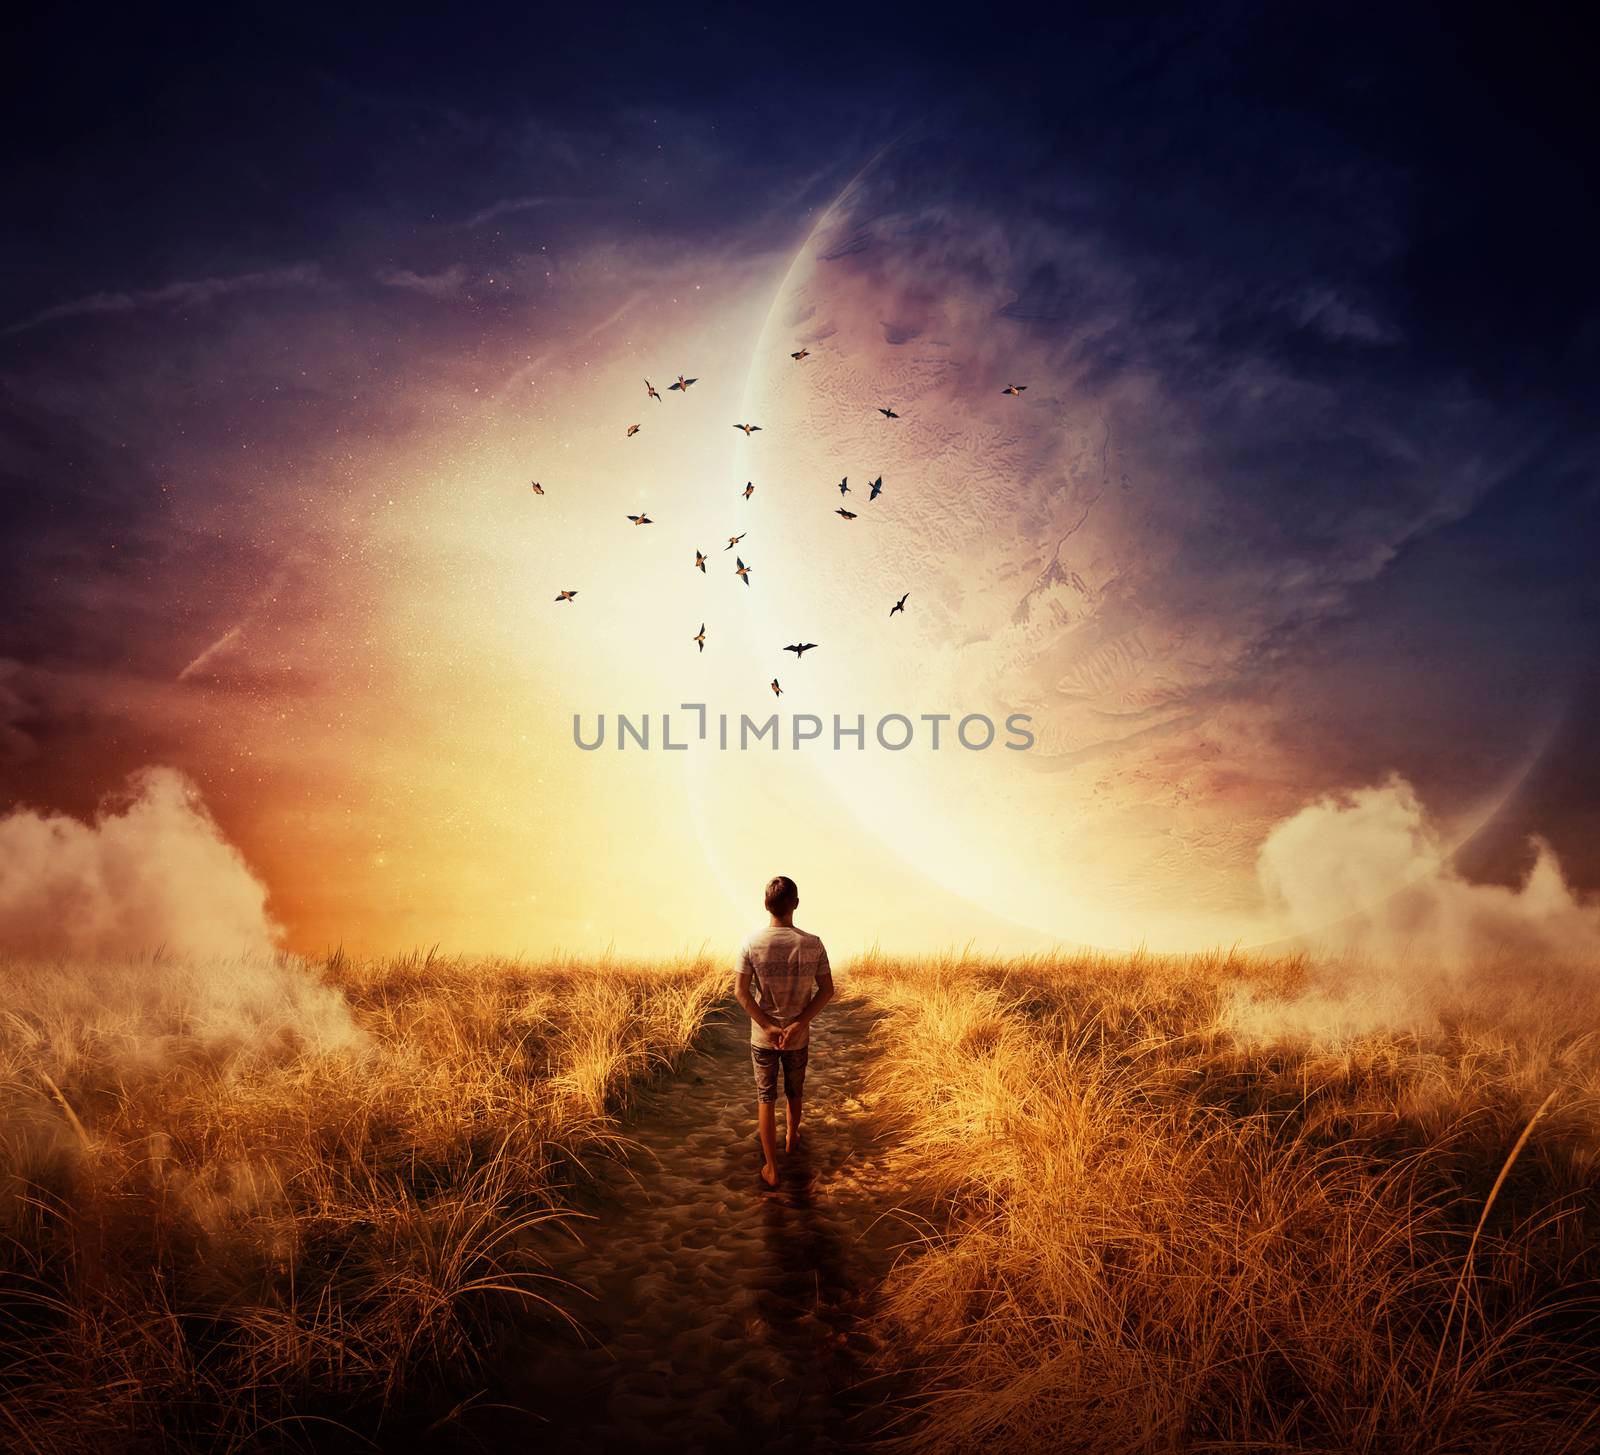 Boy walking on a cpathway with a relax mood, following a group of birds on the space horizon. Way of life concept